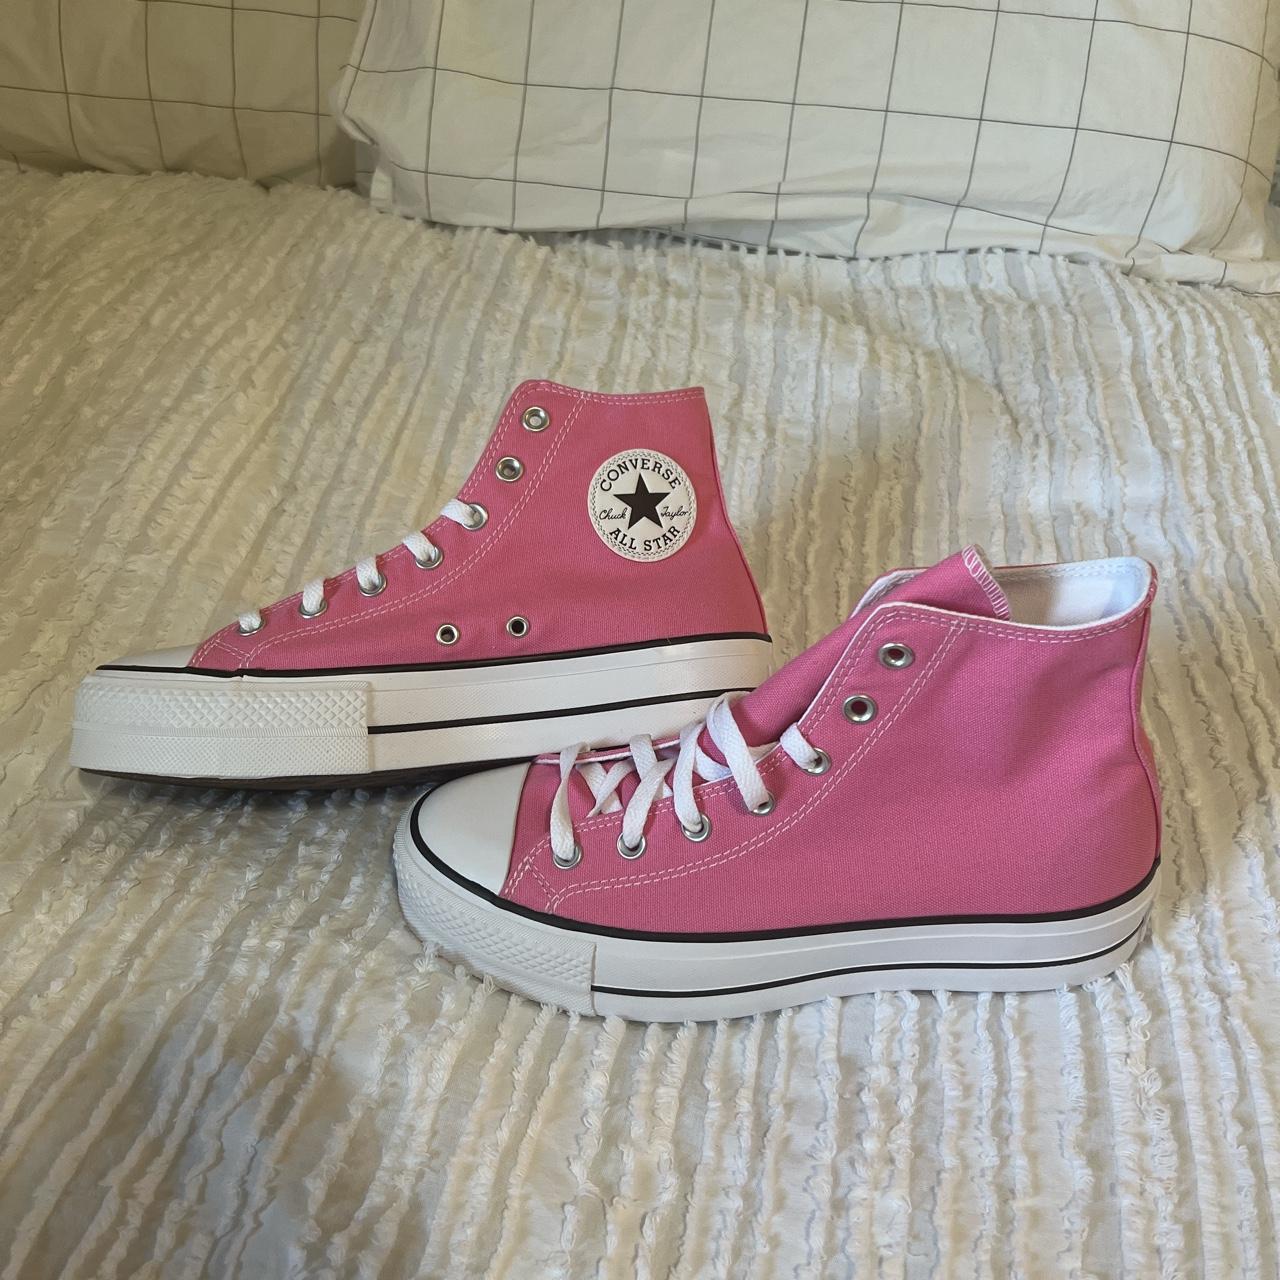 Converse Women's Pink and White Trainers | Depop